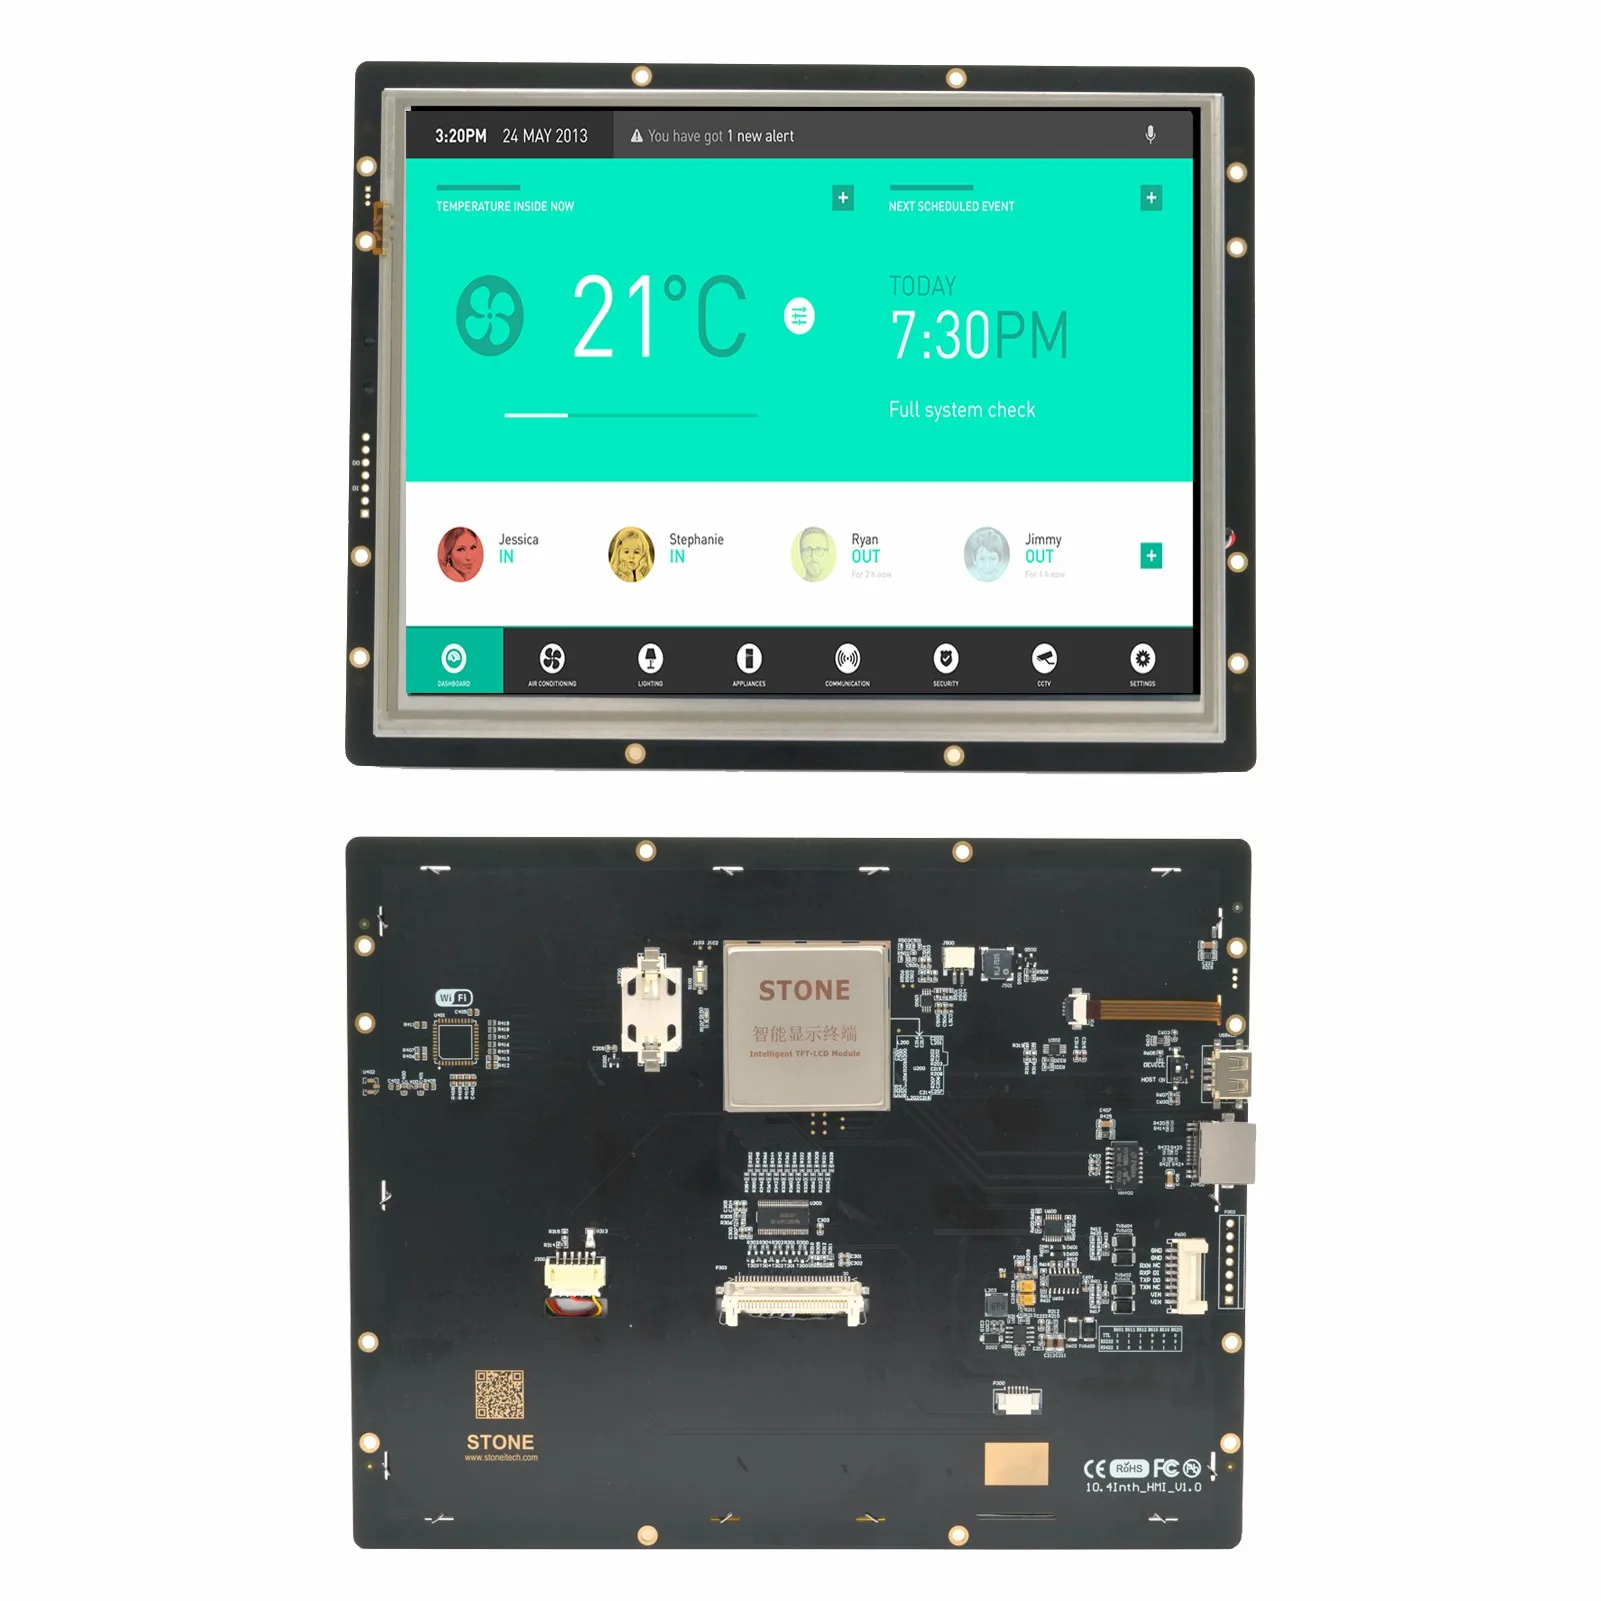 

SCBRHMI 10.4 Inch Full Color LCD Display HMI Resistive Touch Screen Built-In RTC With RS232 Port for Arduino